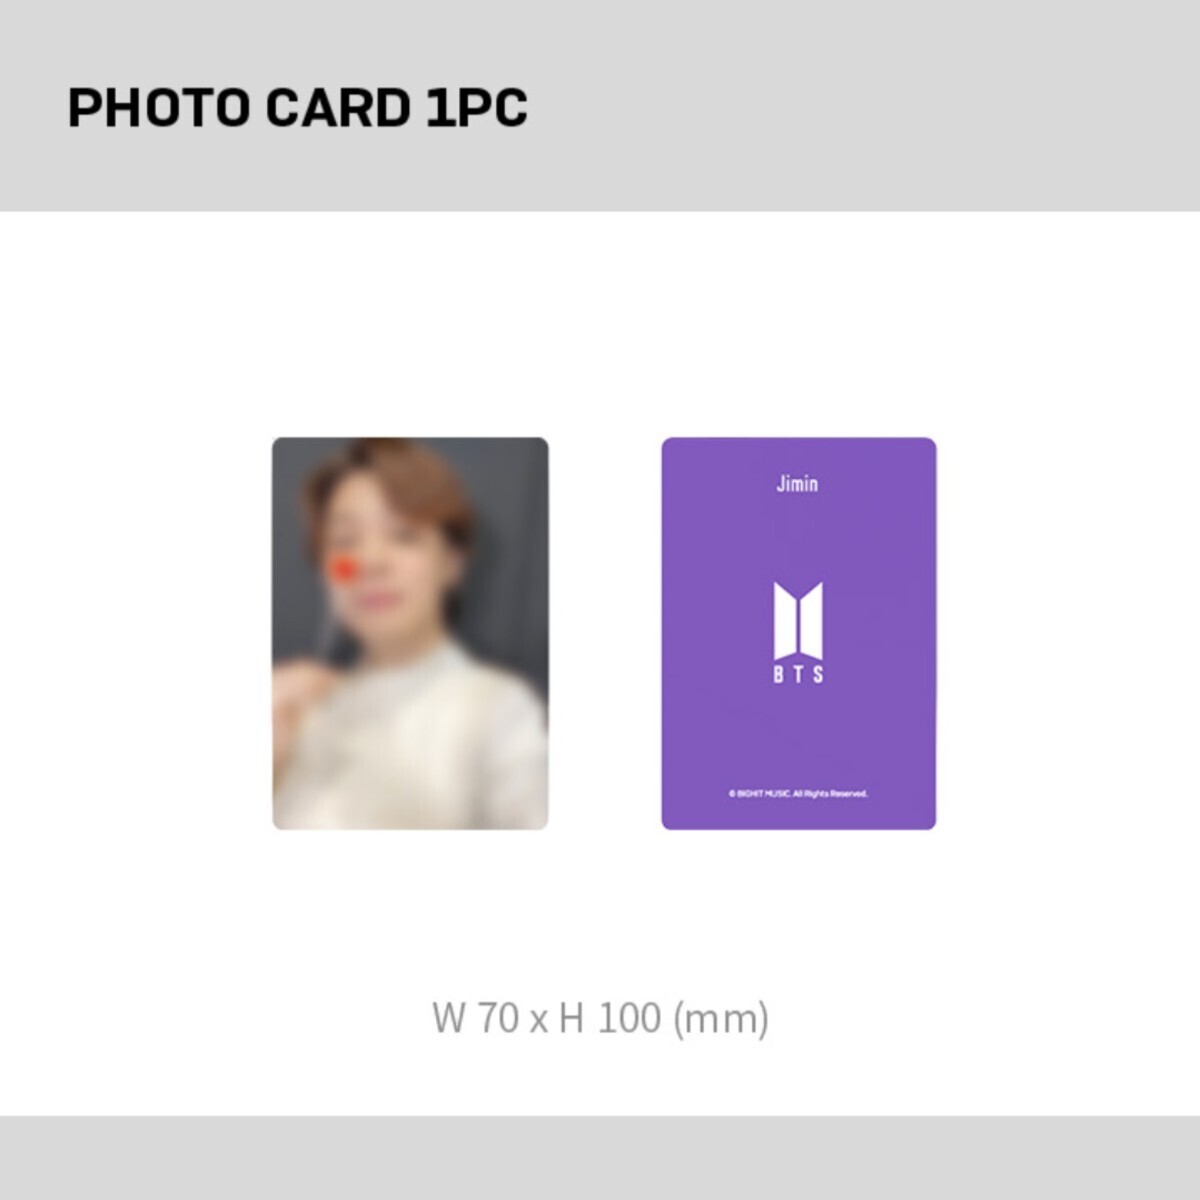 BTS/Merch Box #14/ new goods unopened / coming out none /JIMIN/FC member limitation /jimin/ fan Club limitation /FACE/ trading card / photo card /MerchBox/ official 